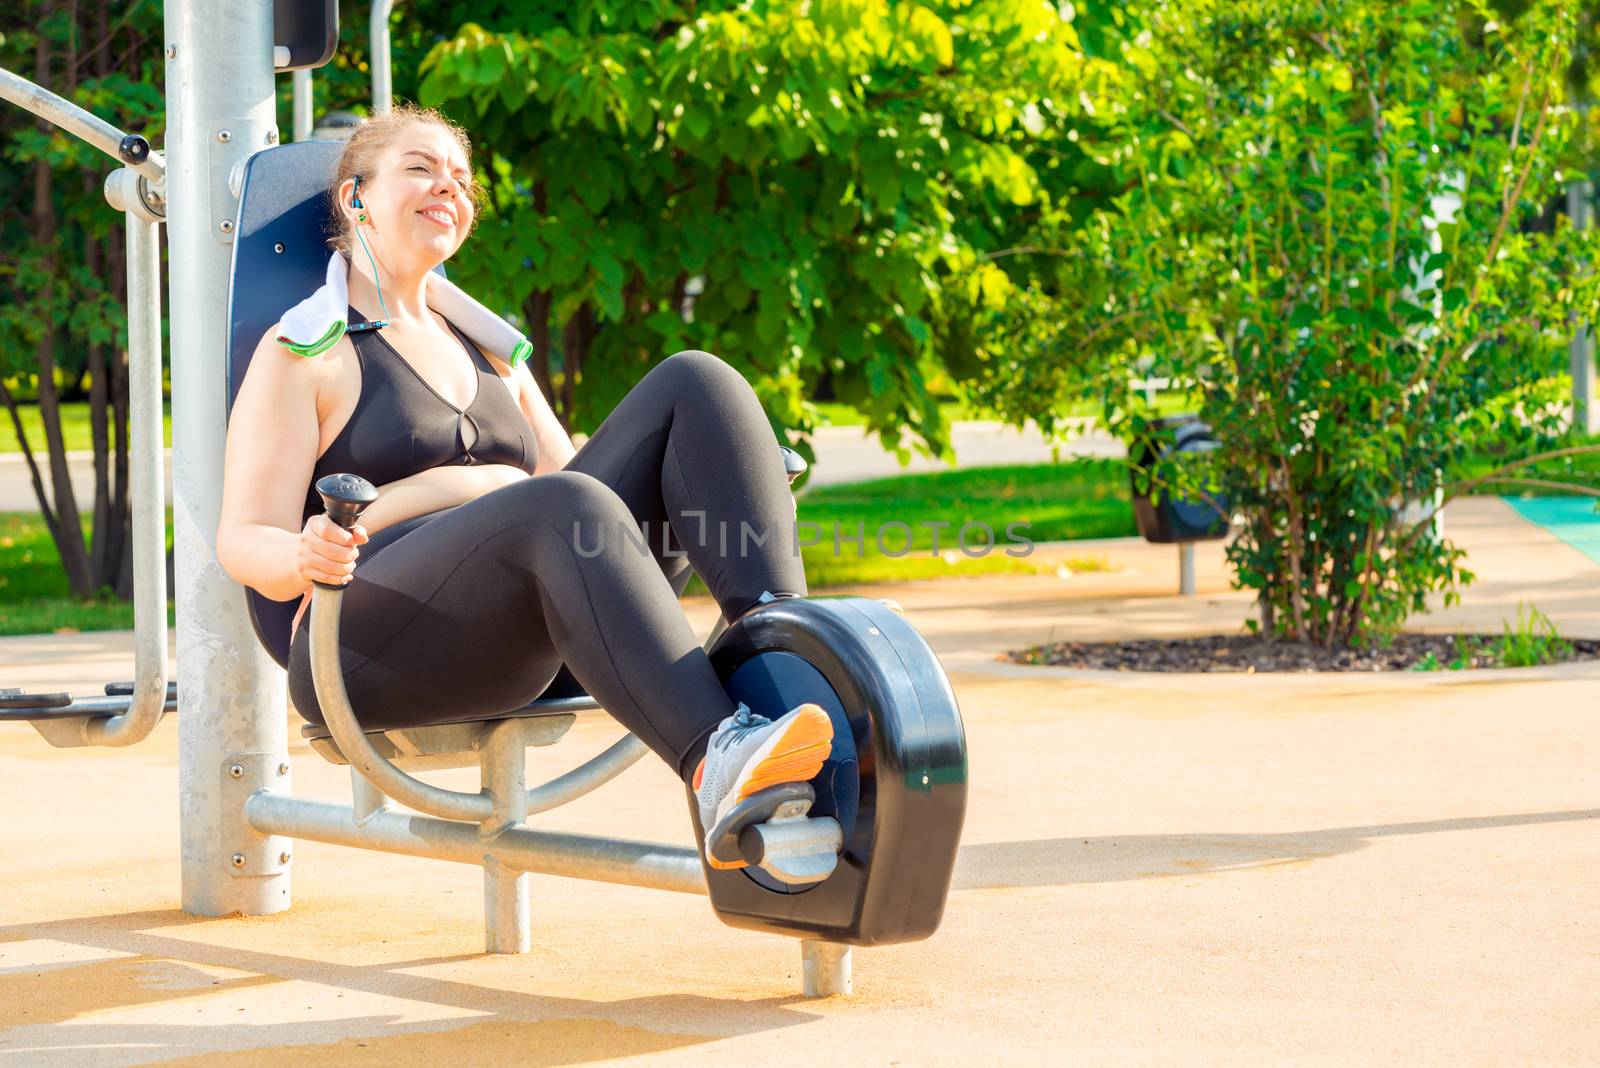 happy and active oversized woman doing exercise on a stationary by kosmsos111